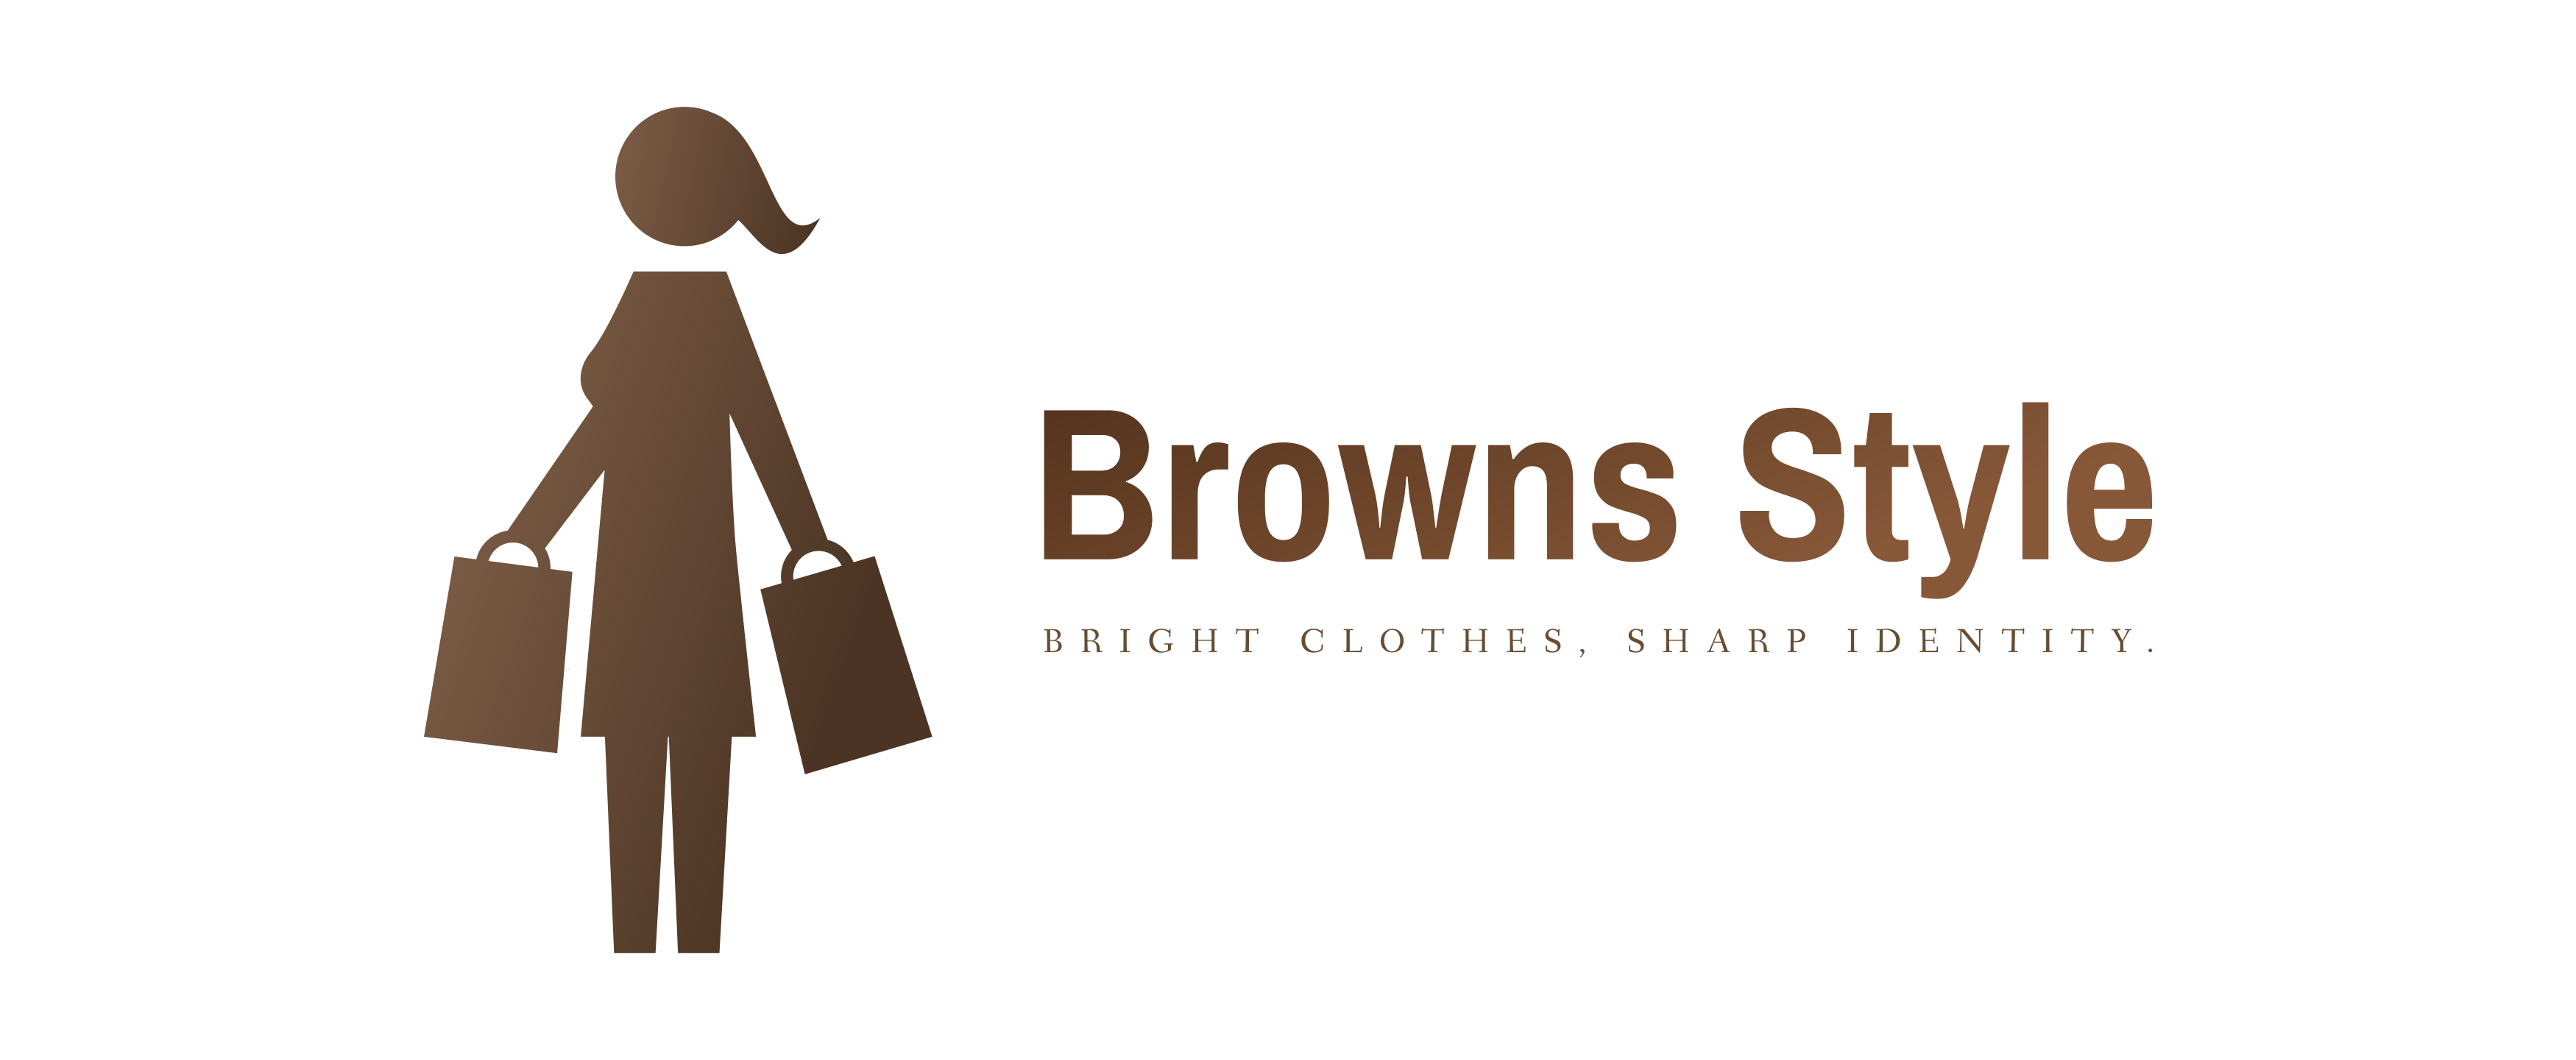 Browns Style